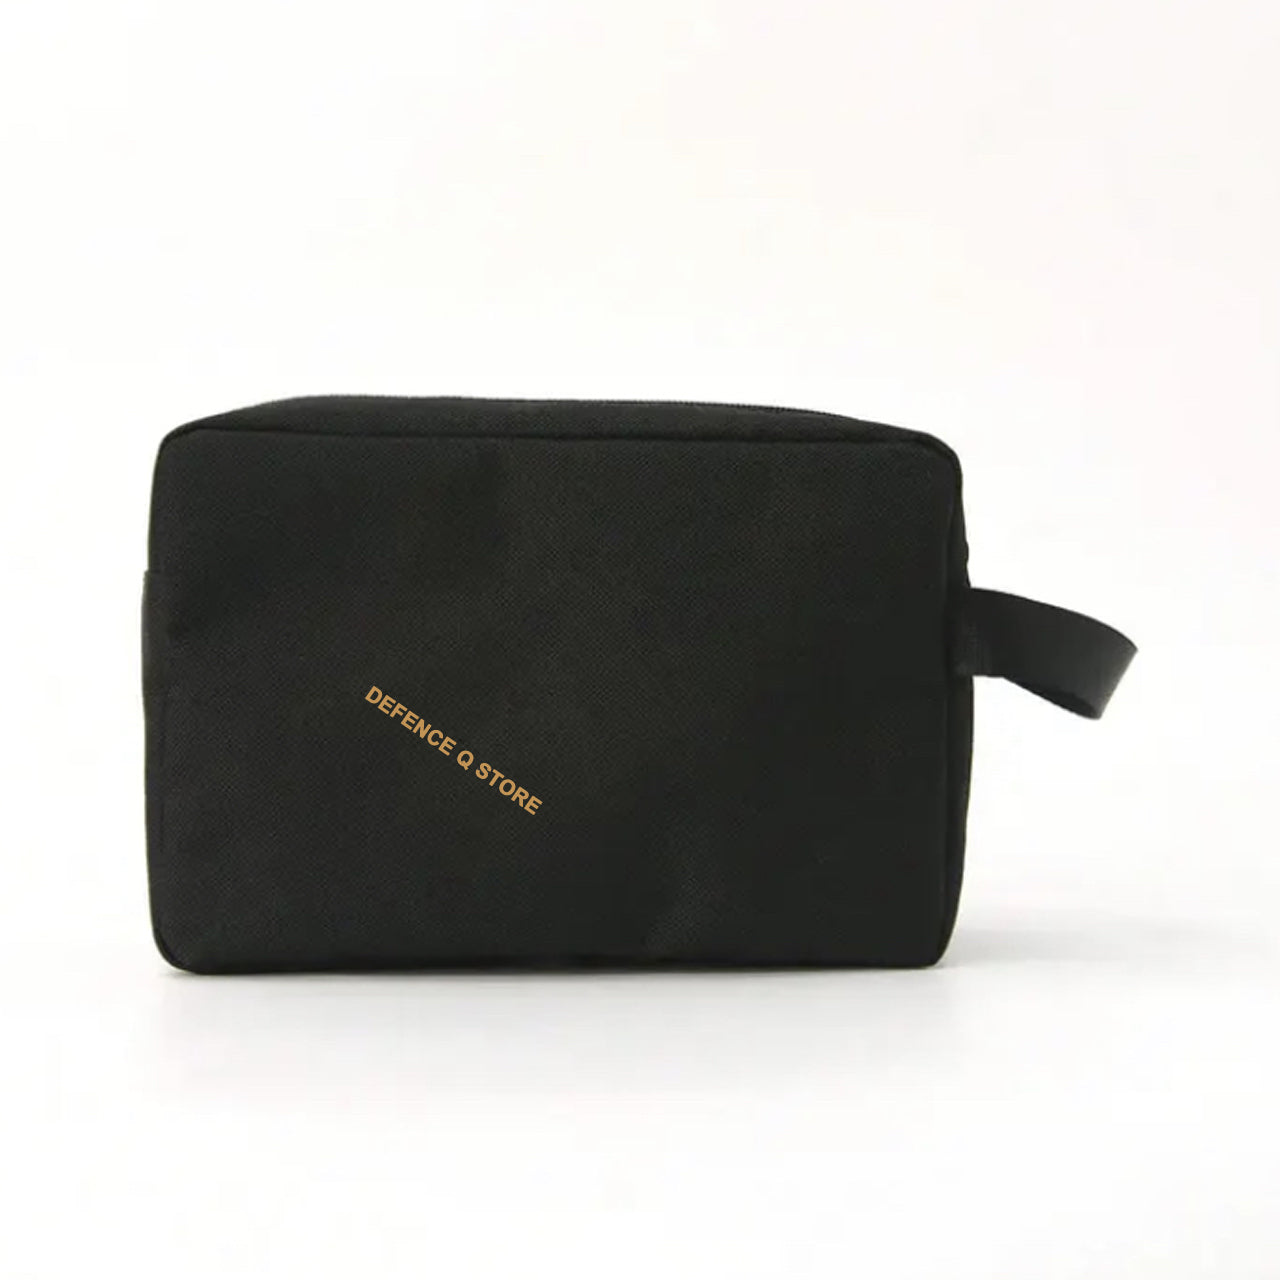 This Toiletry Bag Black is a must-have for any traveler. With dimensions of 16.5cm (H) x 23cm (W) x 9cm (D), it's perfect for storing toiletries and accessories. Made from 100% Polyester, it boasts a sleek and durable design. The side carry handle, front pocket compartment with closeable zip, and top zip closure make it a convenient and stylish choice. www.defenceqstore.com.au